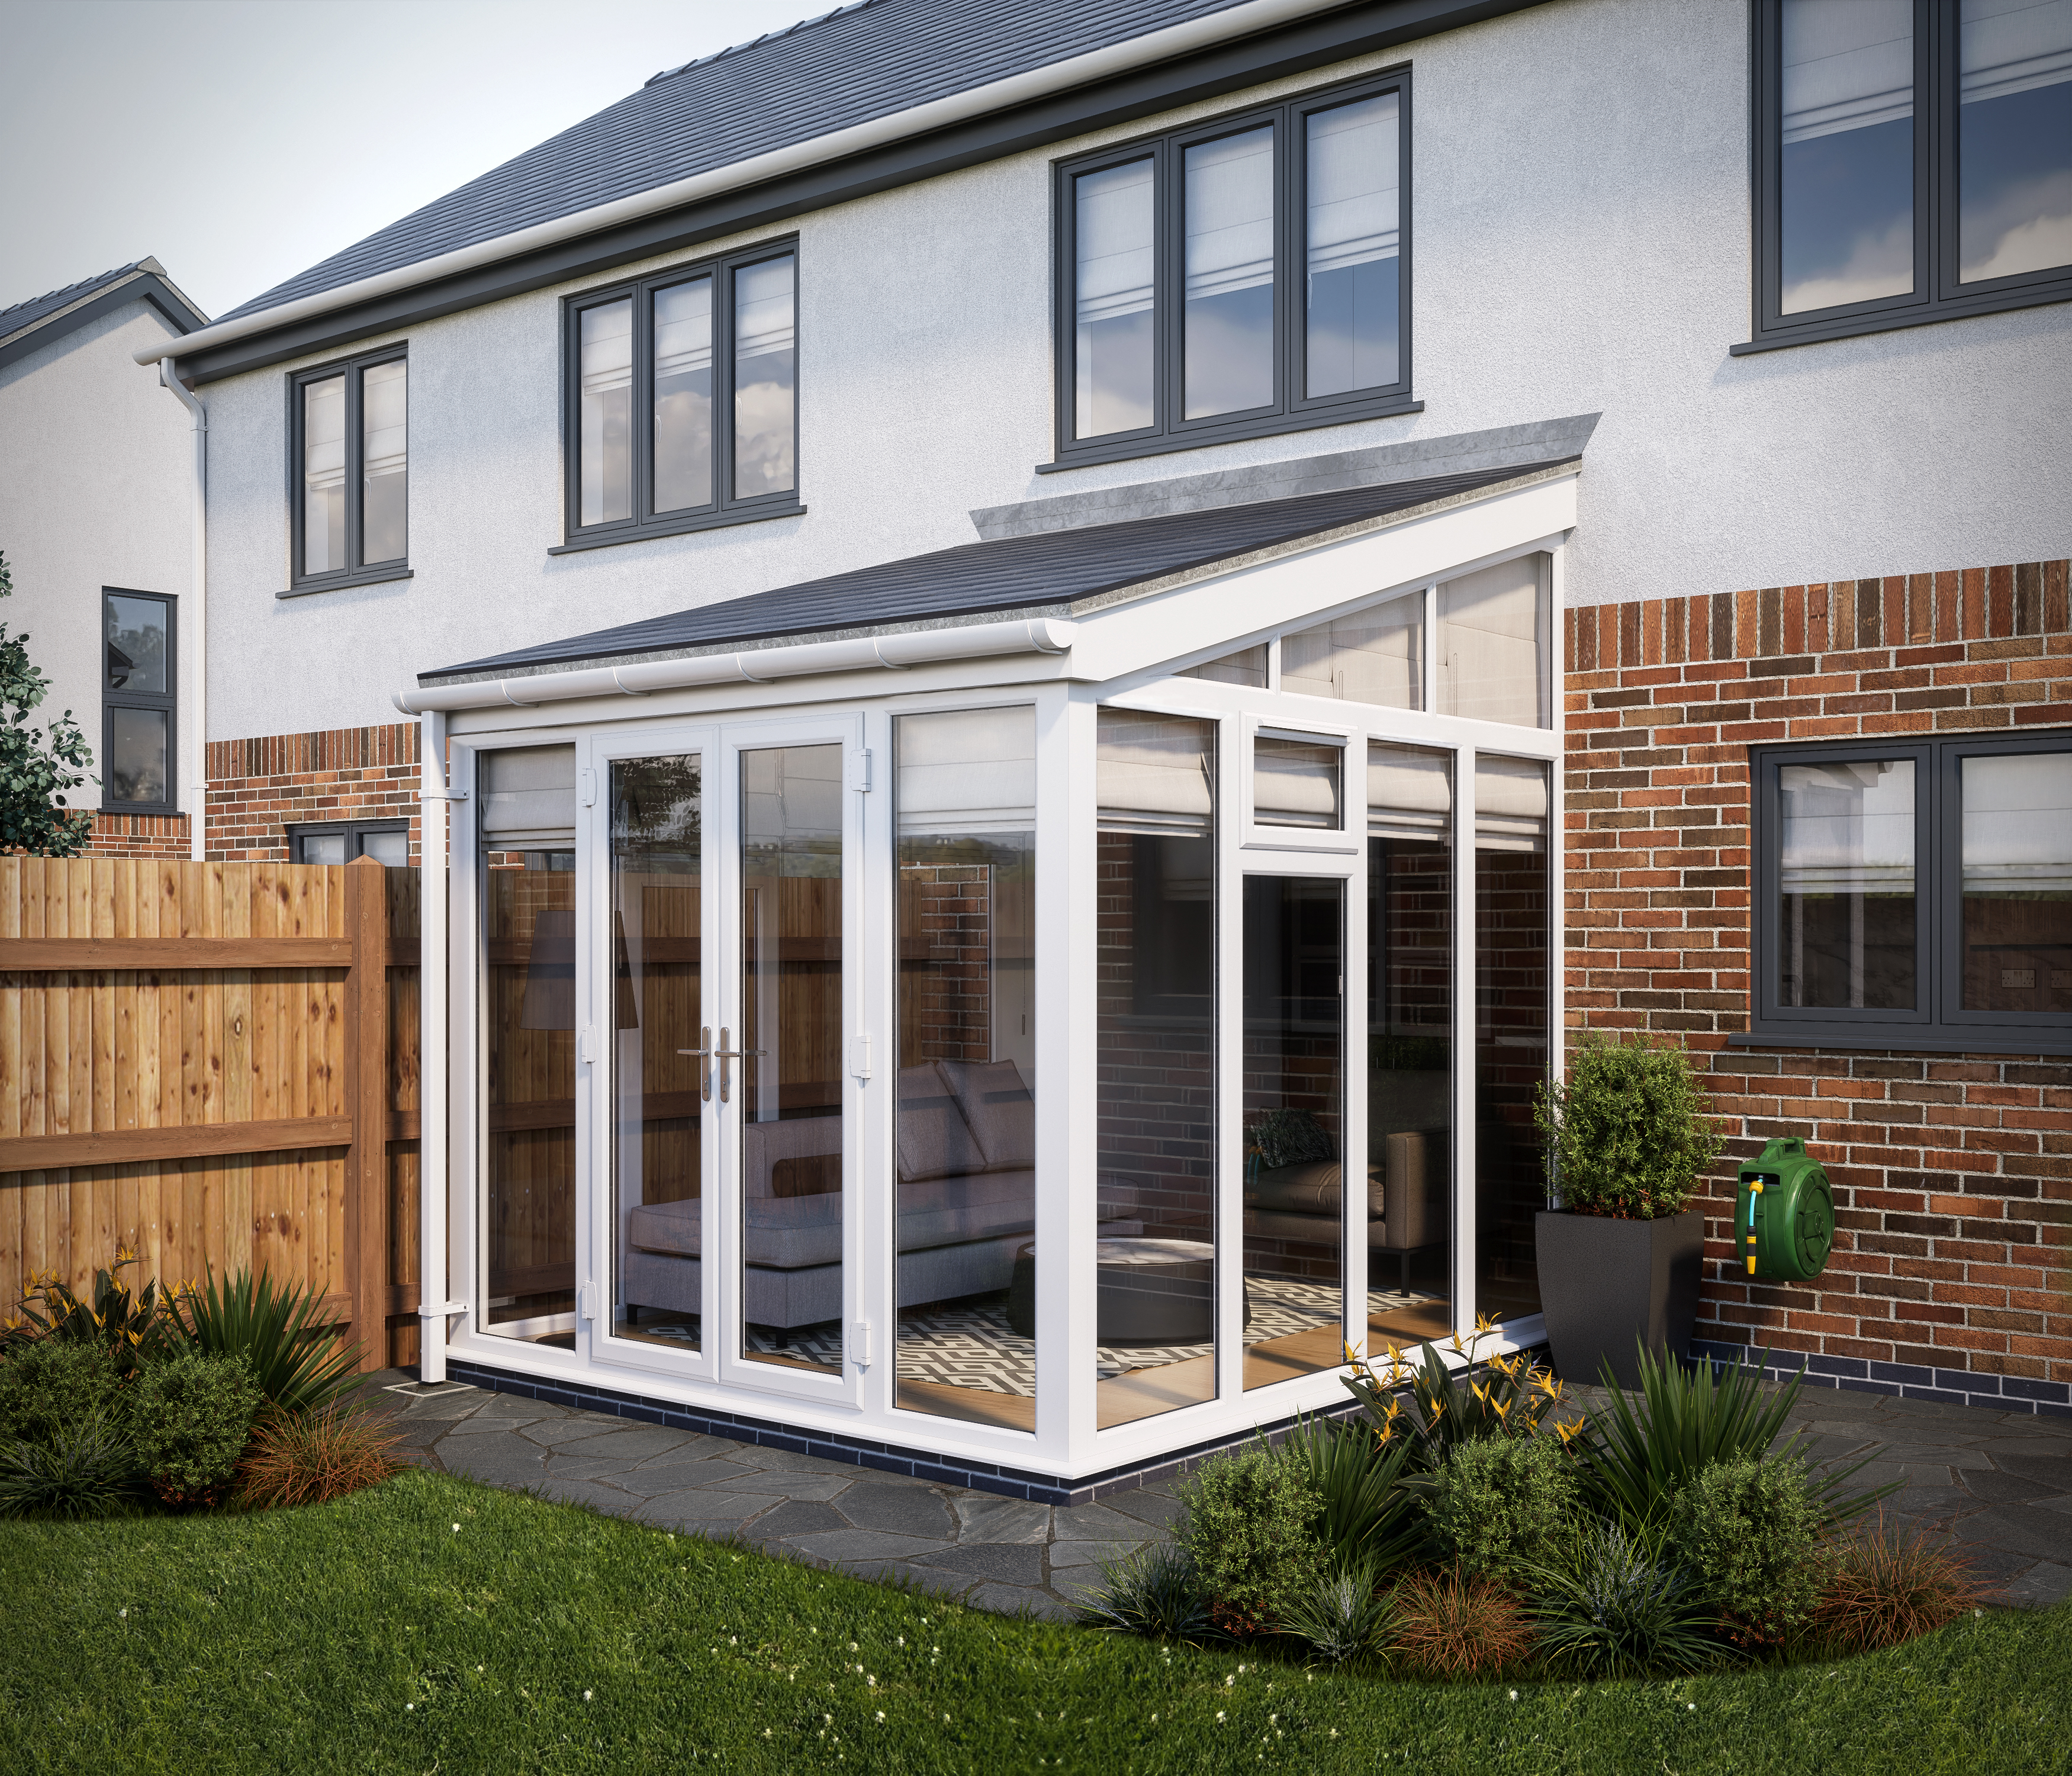 SOLid roof Full Height Lean to Conservatory White Frames with Titanium Grey Tiles